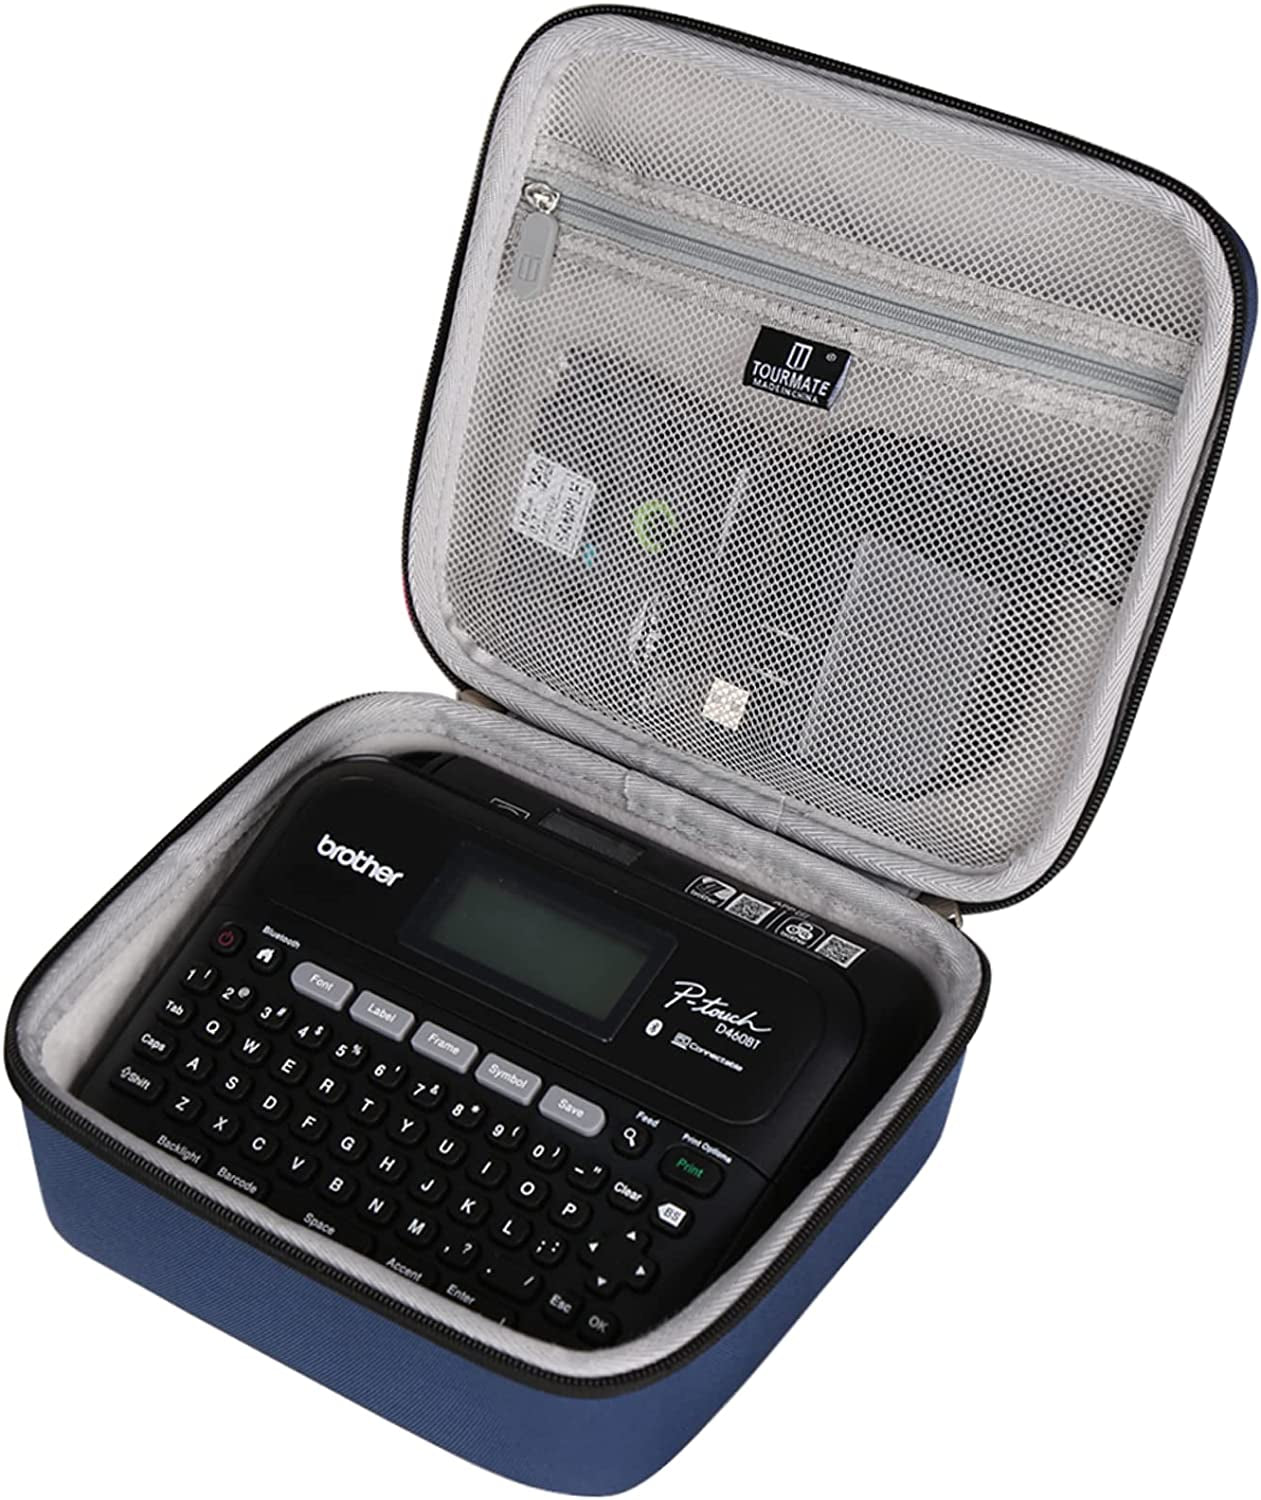 Hard Case Compatible with Brother P-Touch PT-D460BT Business Expert Connected Label Maker, Case Only